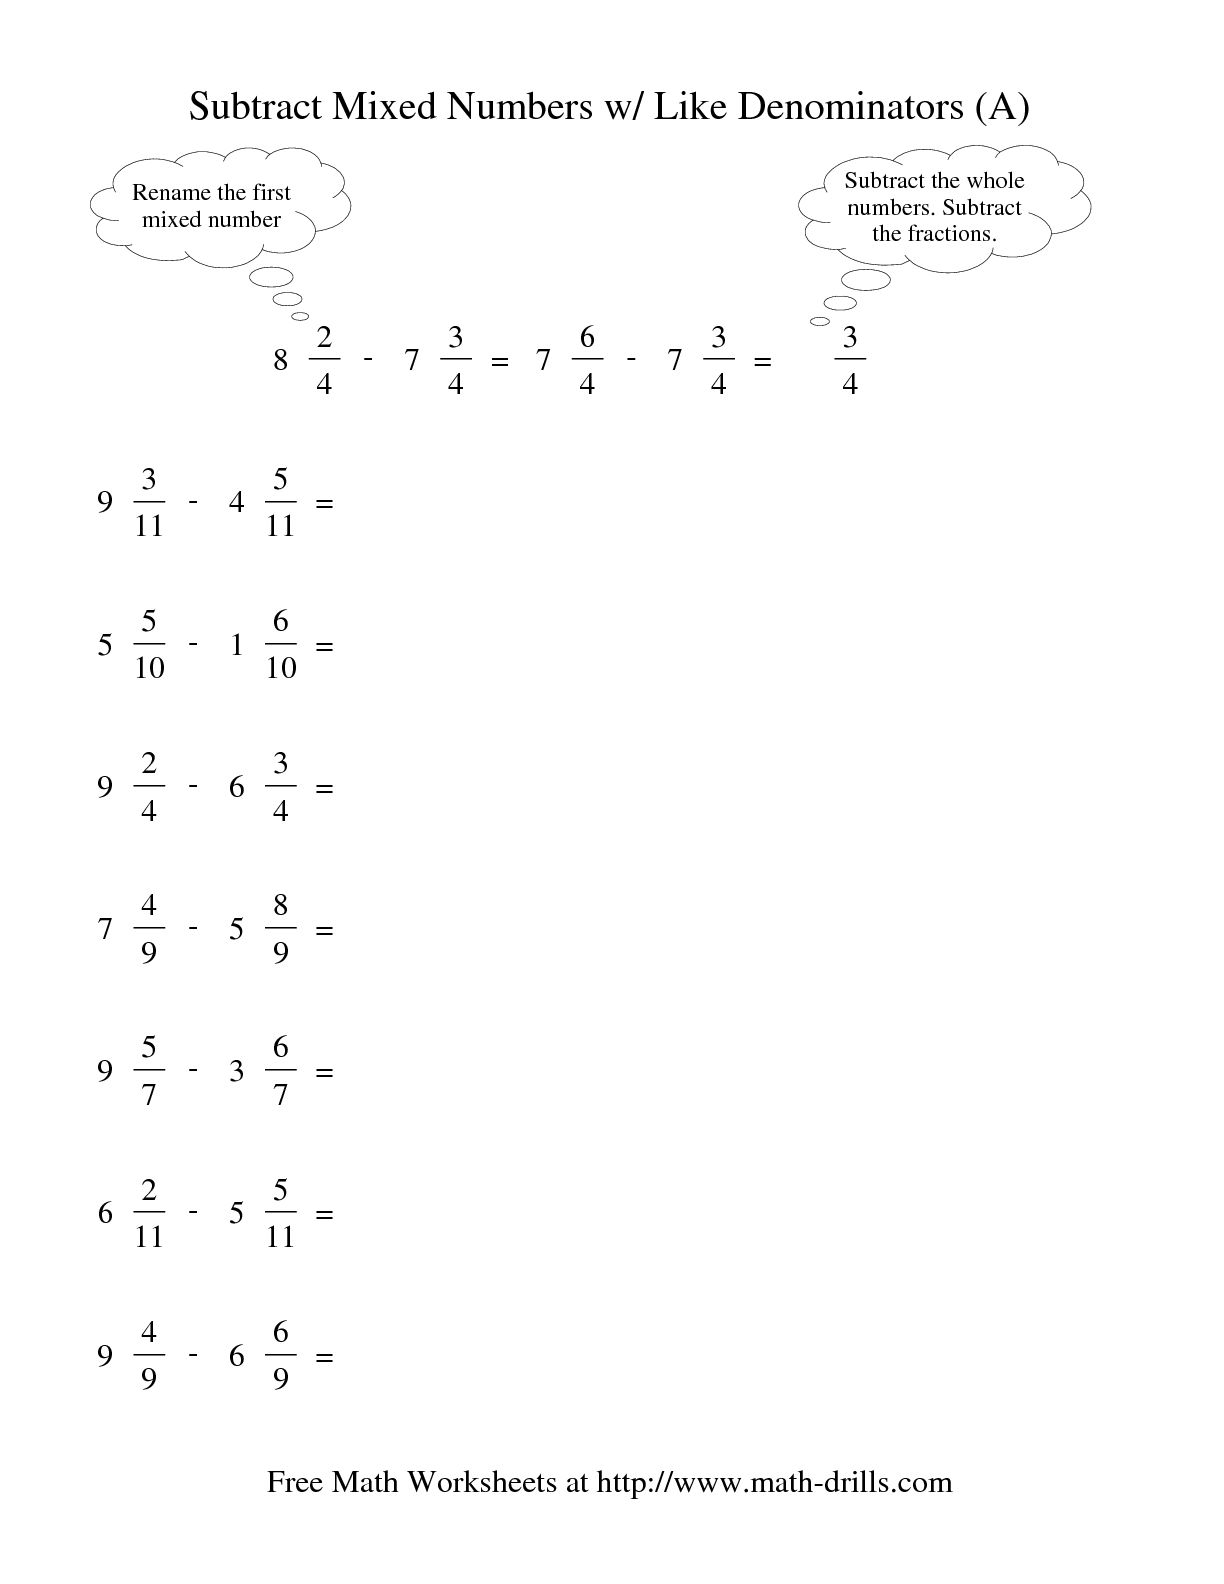 adding-mixed-numbers-with-unlike-denominators-worksheet-math-aids-2022-numbersworksheets